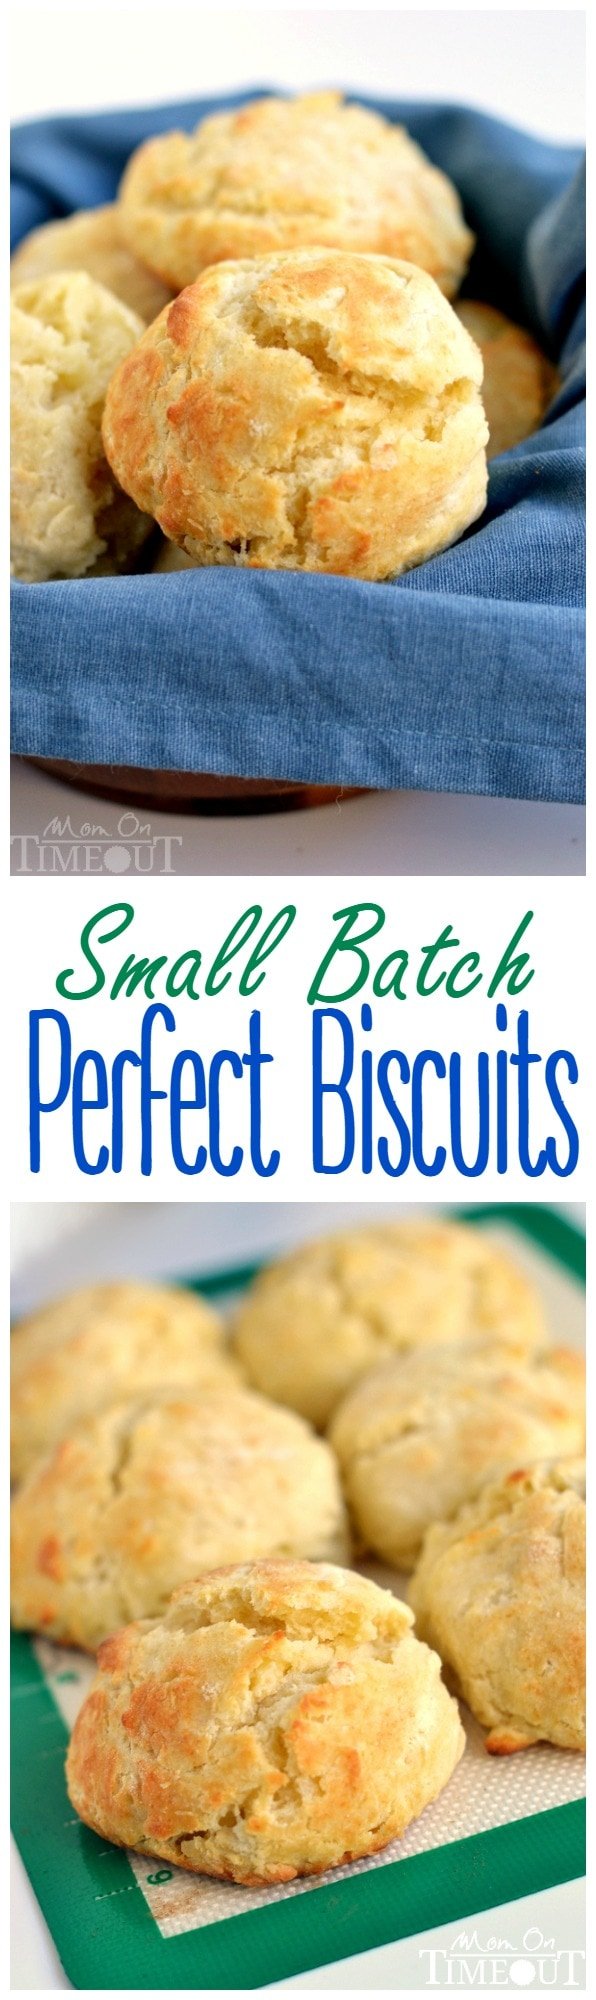 small batch biscuits collage in basket and baking sheet